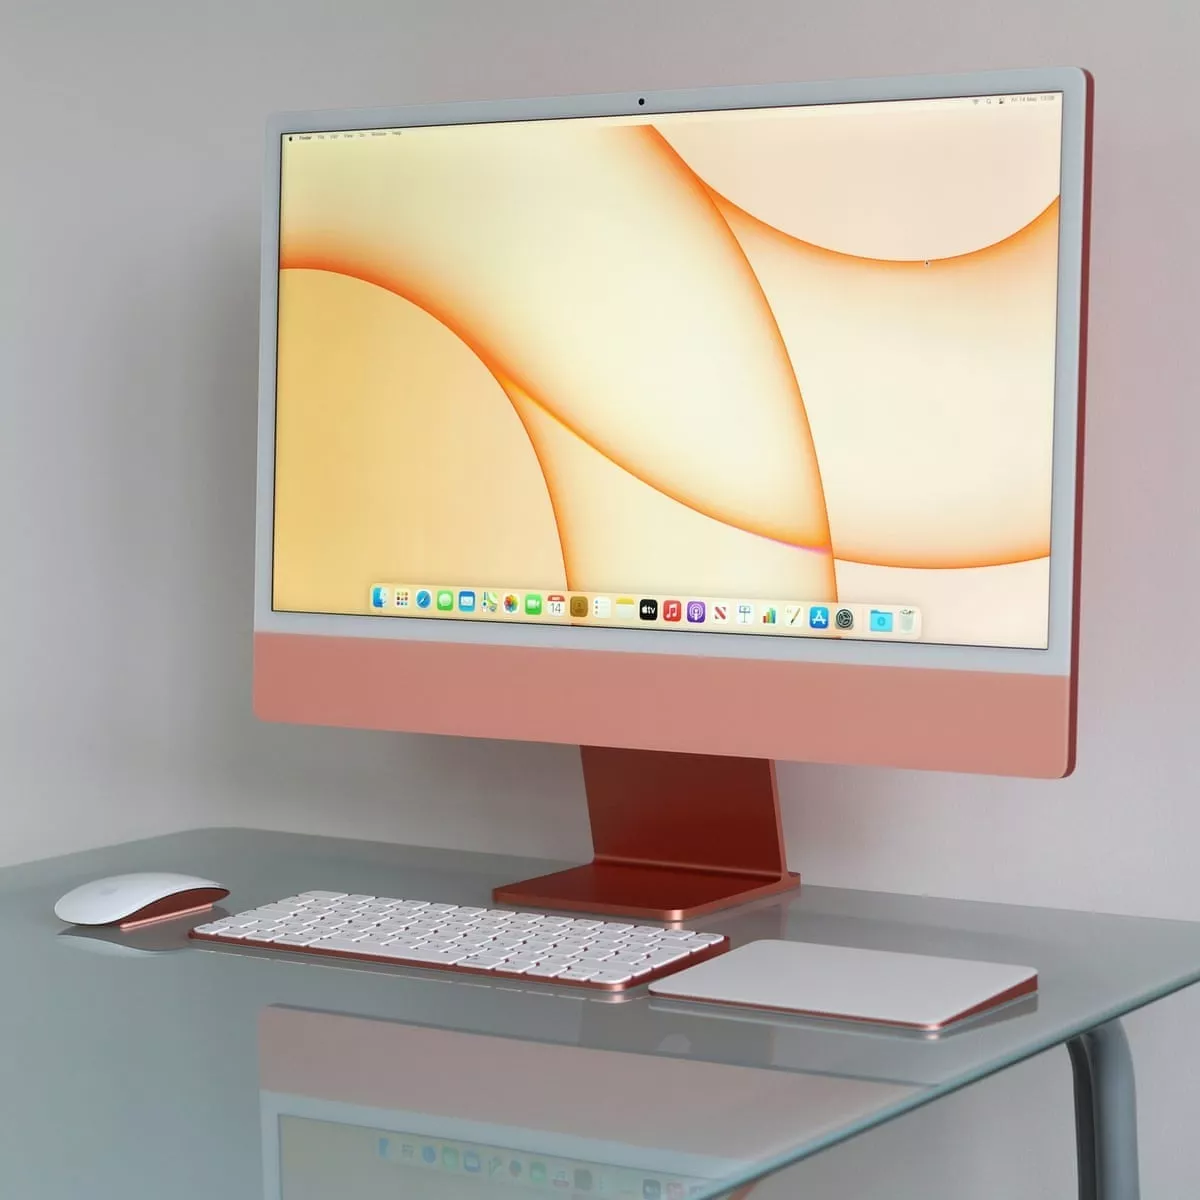  Wholesales Prices For 2021 Apple iMac 24-inch 27 